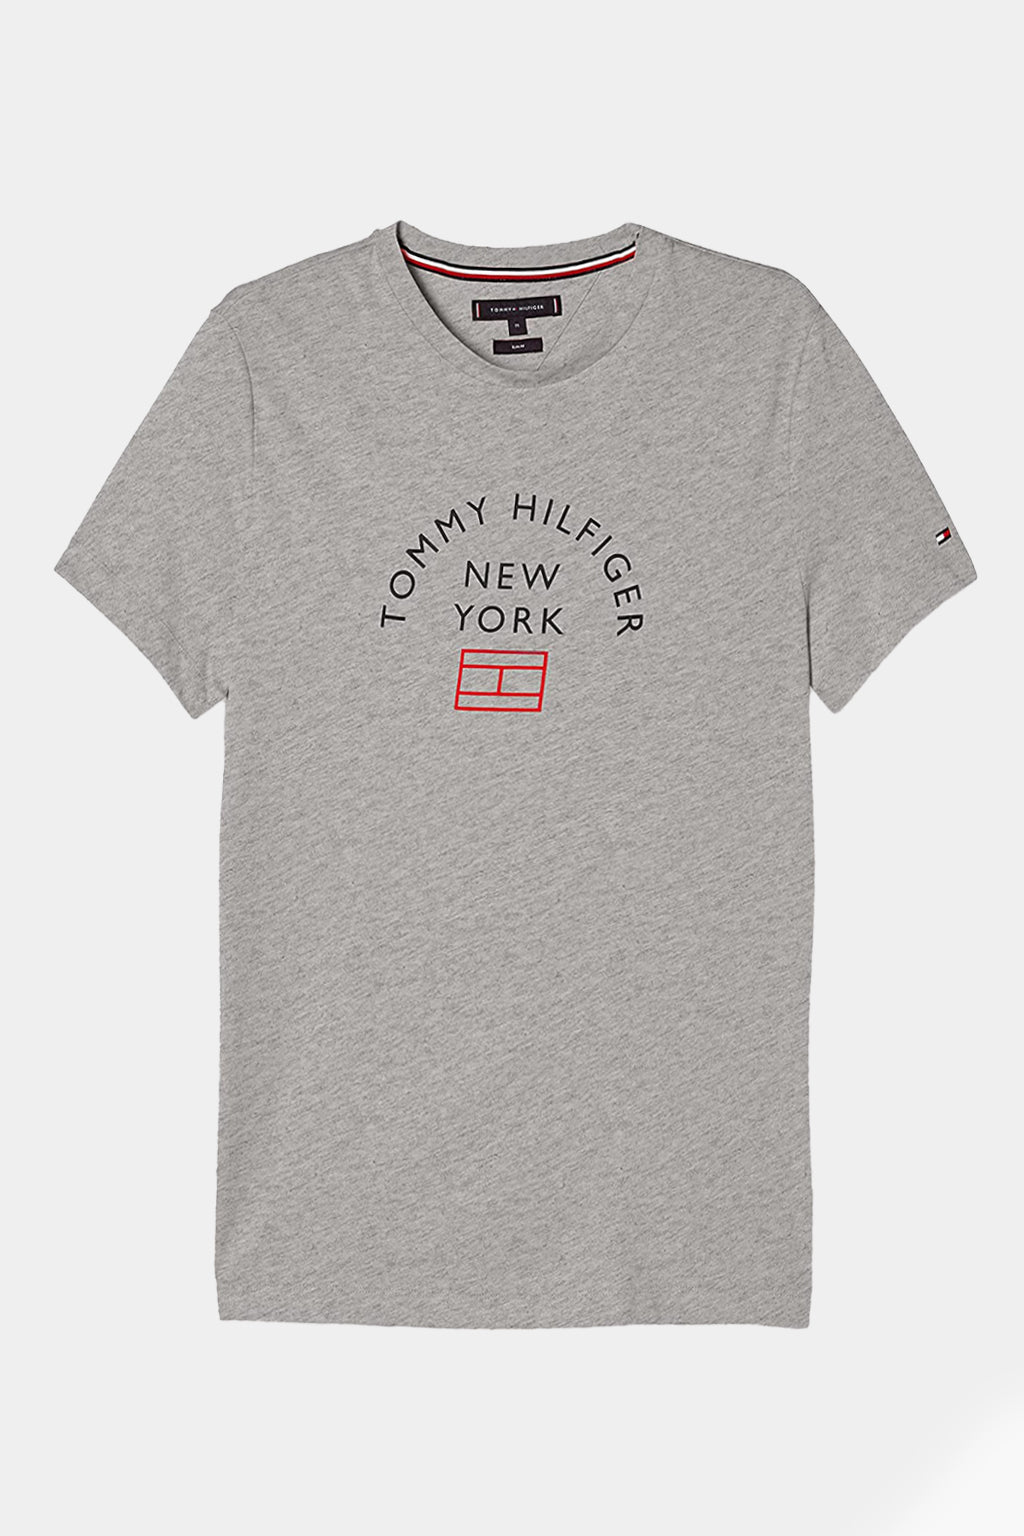 Tommy Hilfiger - Corp Arch Tee